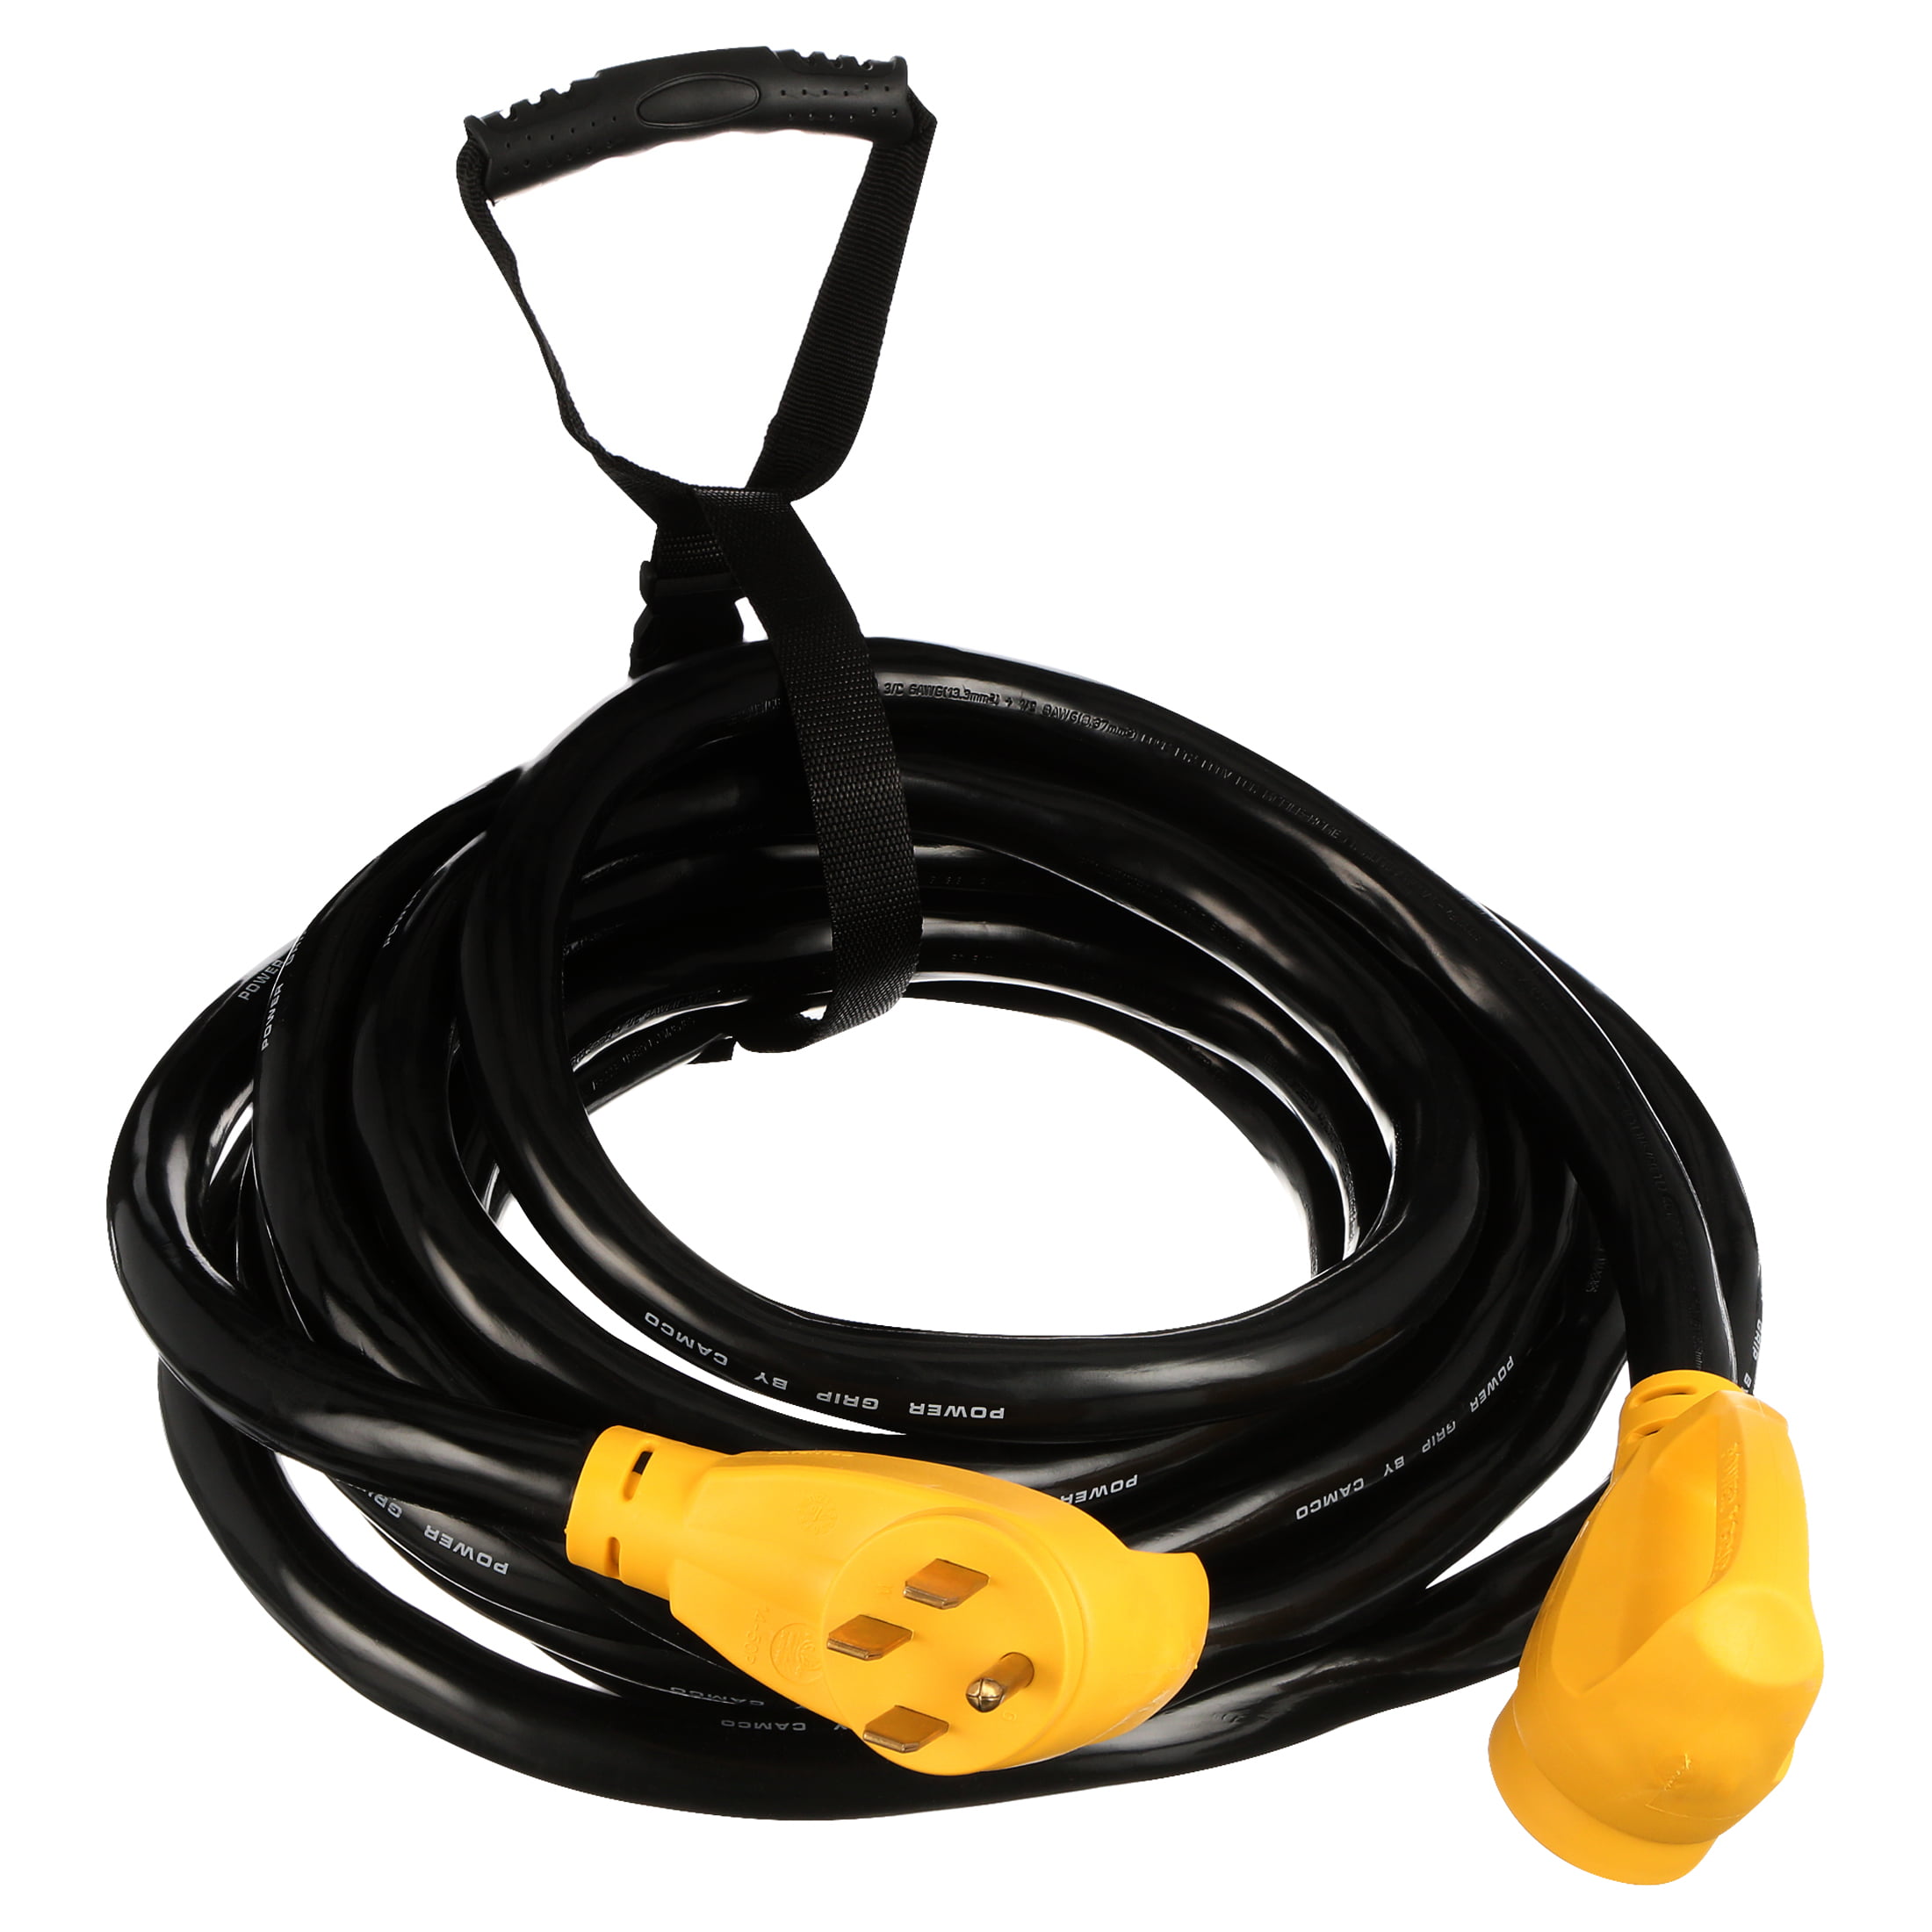 SCITOO Heavy Duty RV Electrical Cord Cable Adapter 15 amp Male to 50 amp